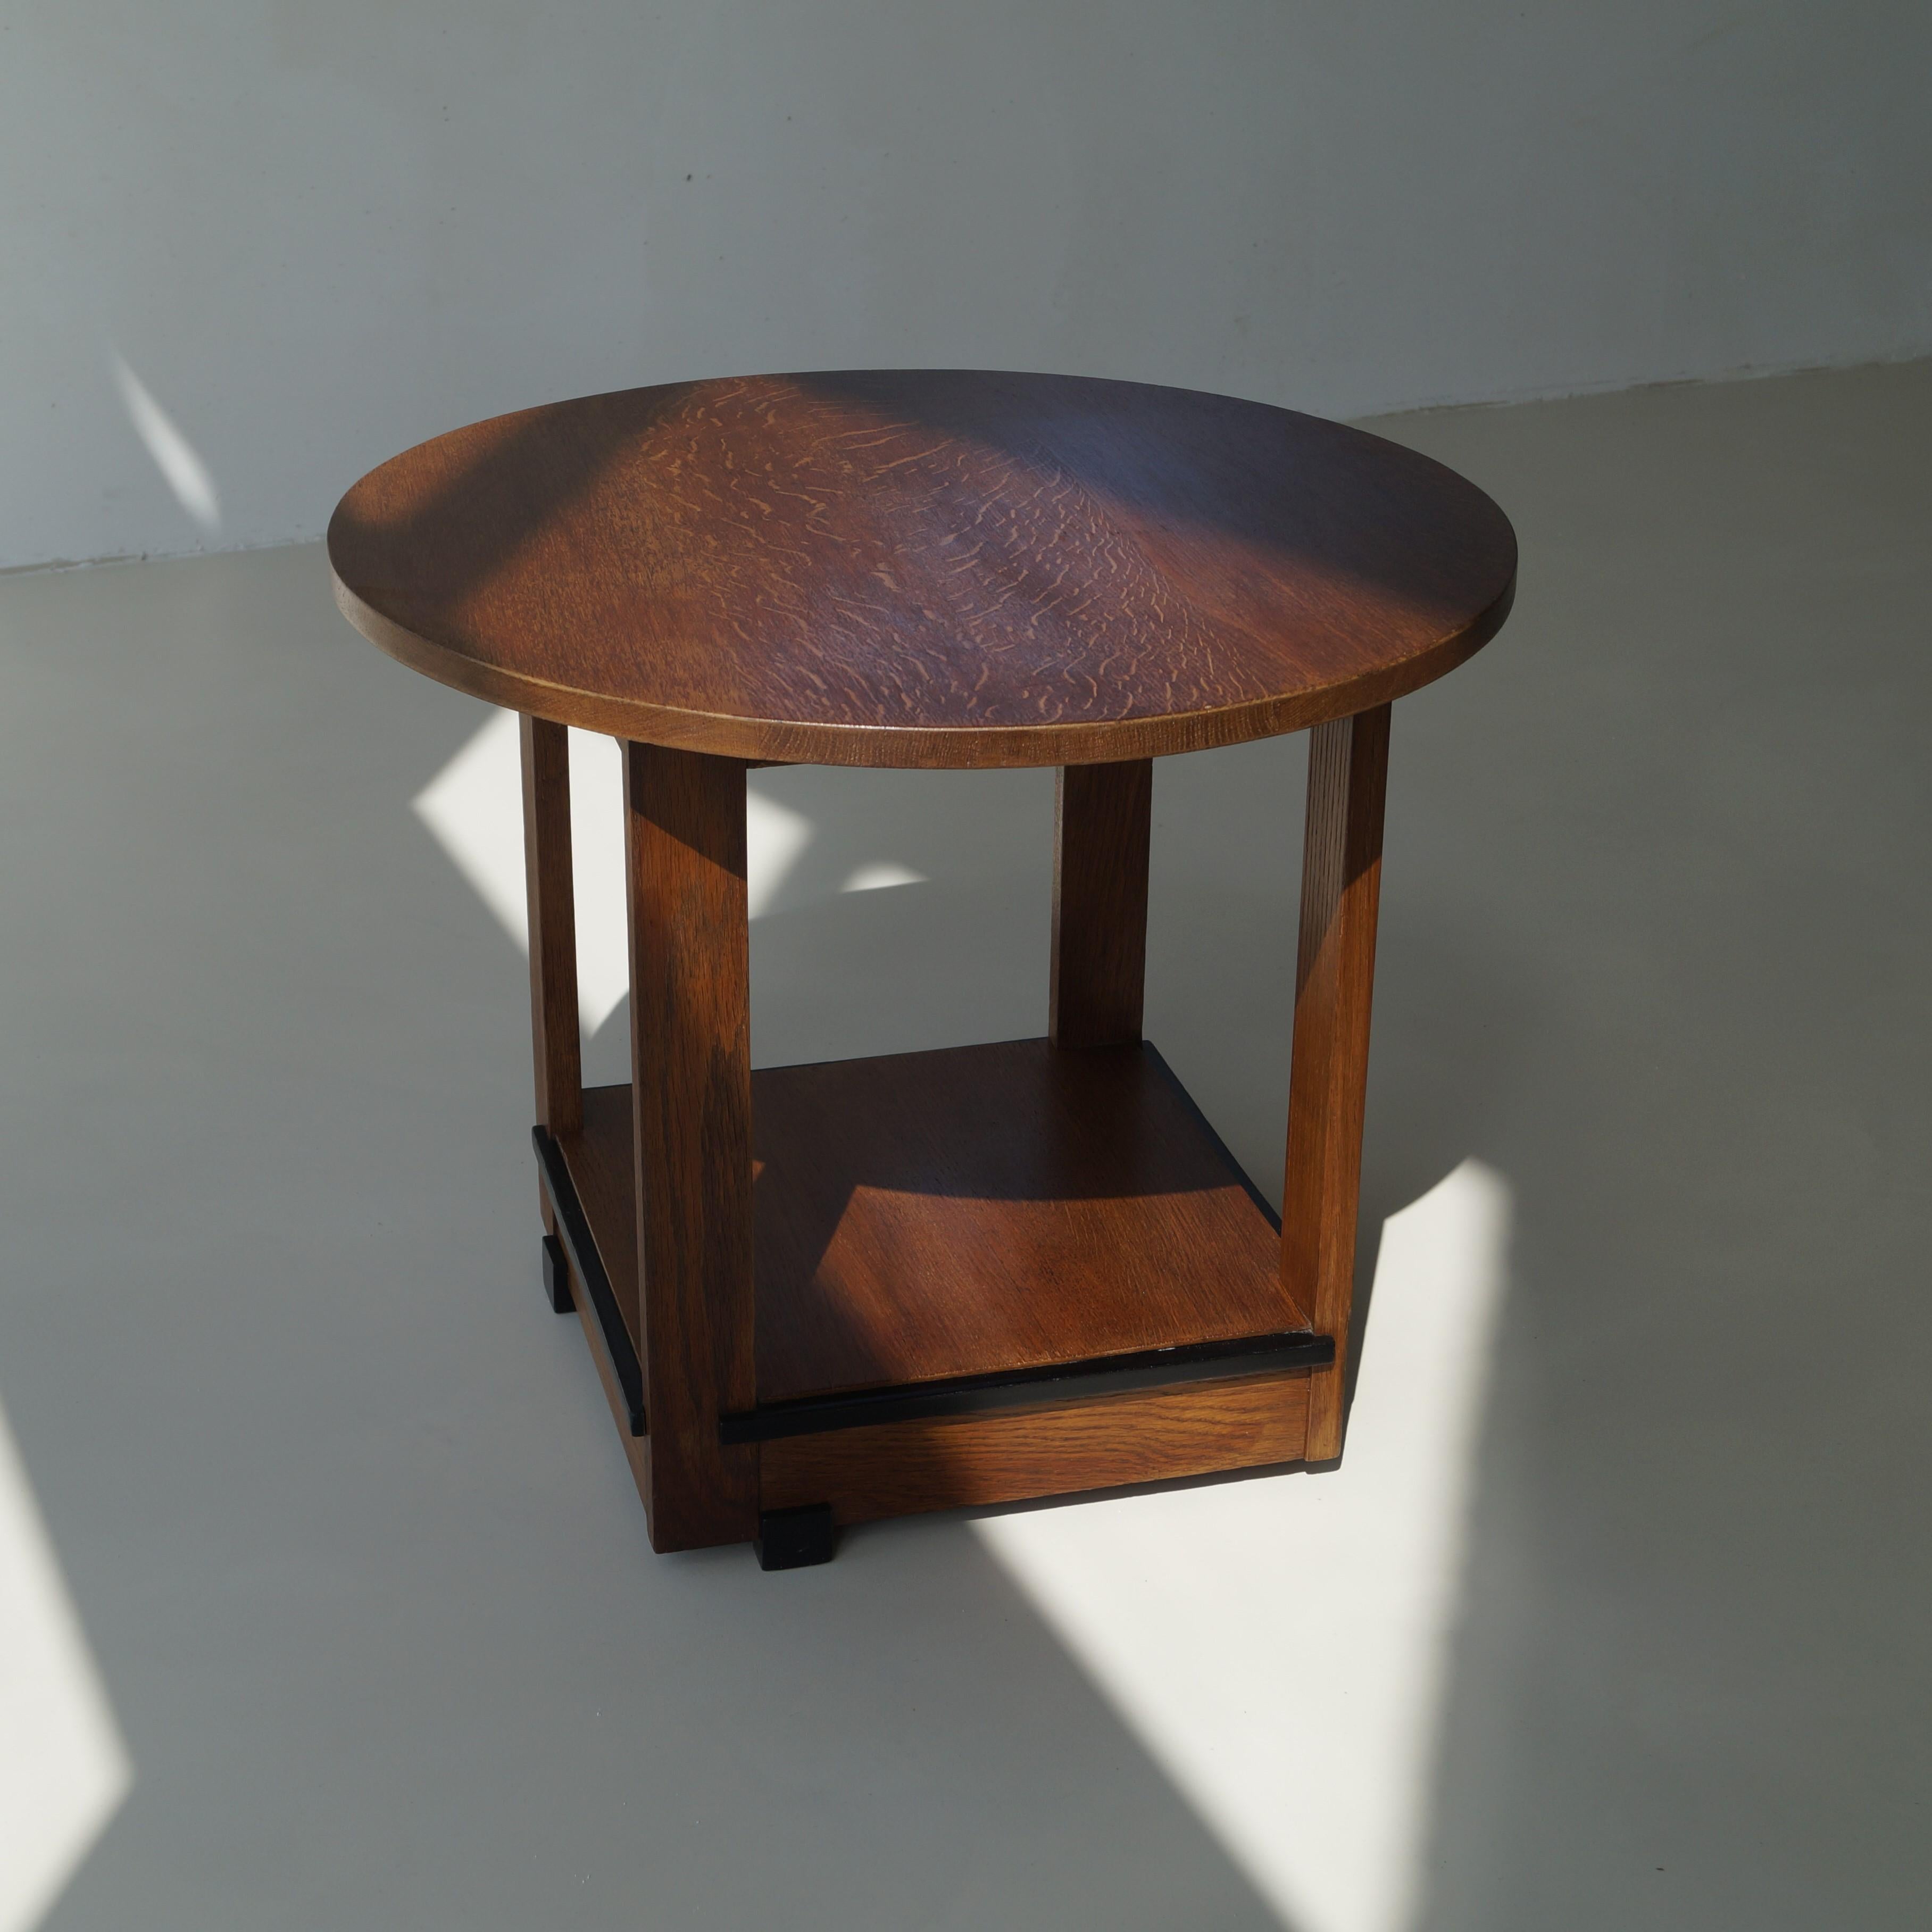 Modernist Dutch Art Deco occasional table attributed to Jan Brunott, 1920s For Sale 2